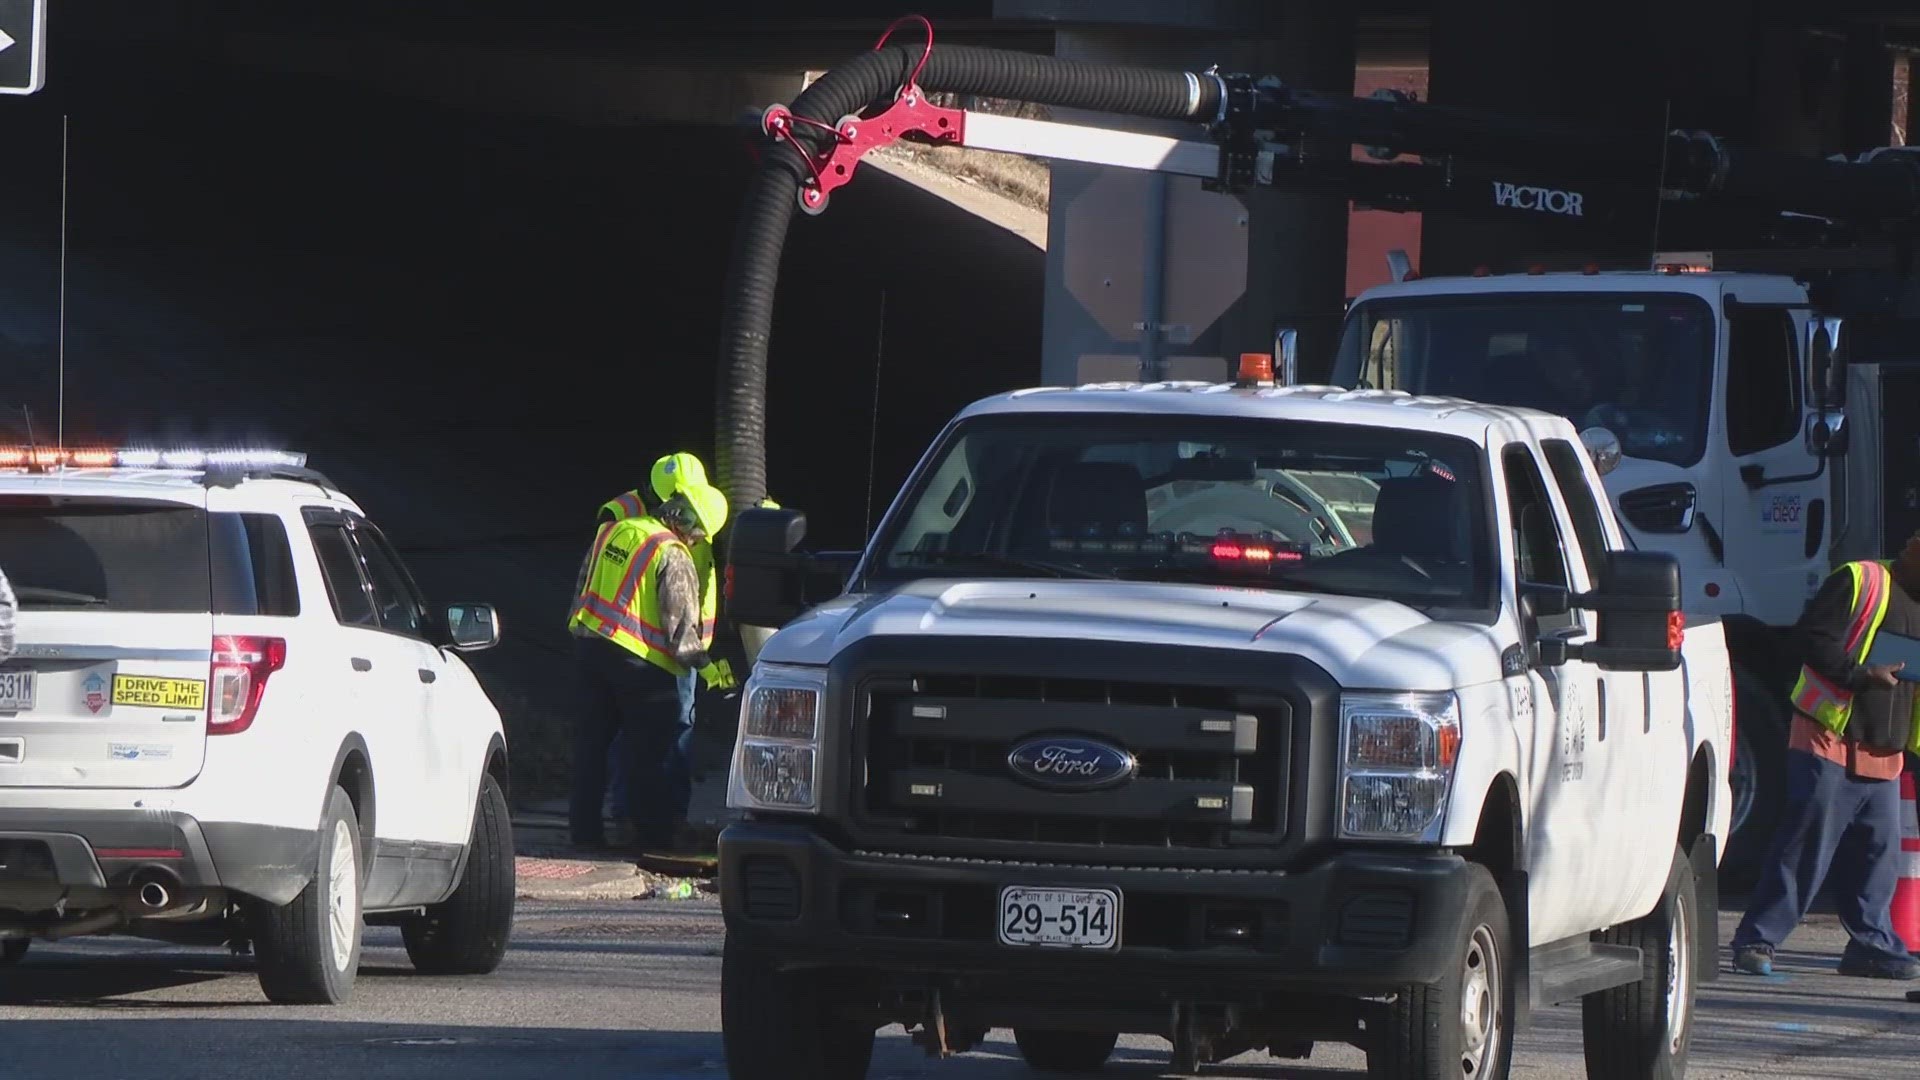 The Missouri Department of Transportation announced Monday that the Bates Street exit ramp from southbound Interstate 55 will be closed. It will be indefinitely.